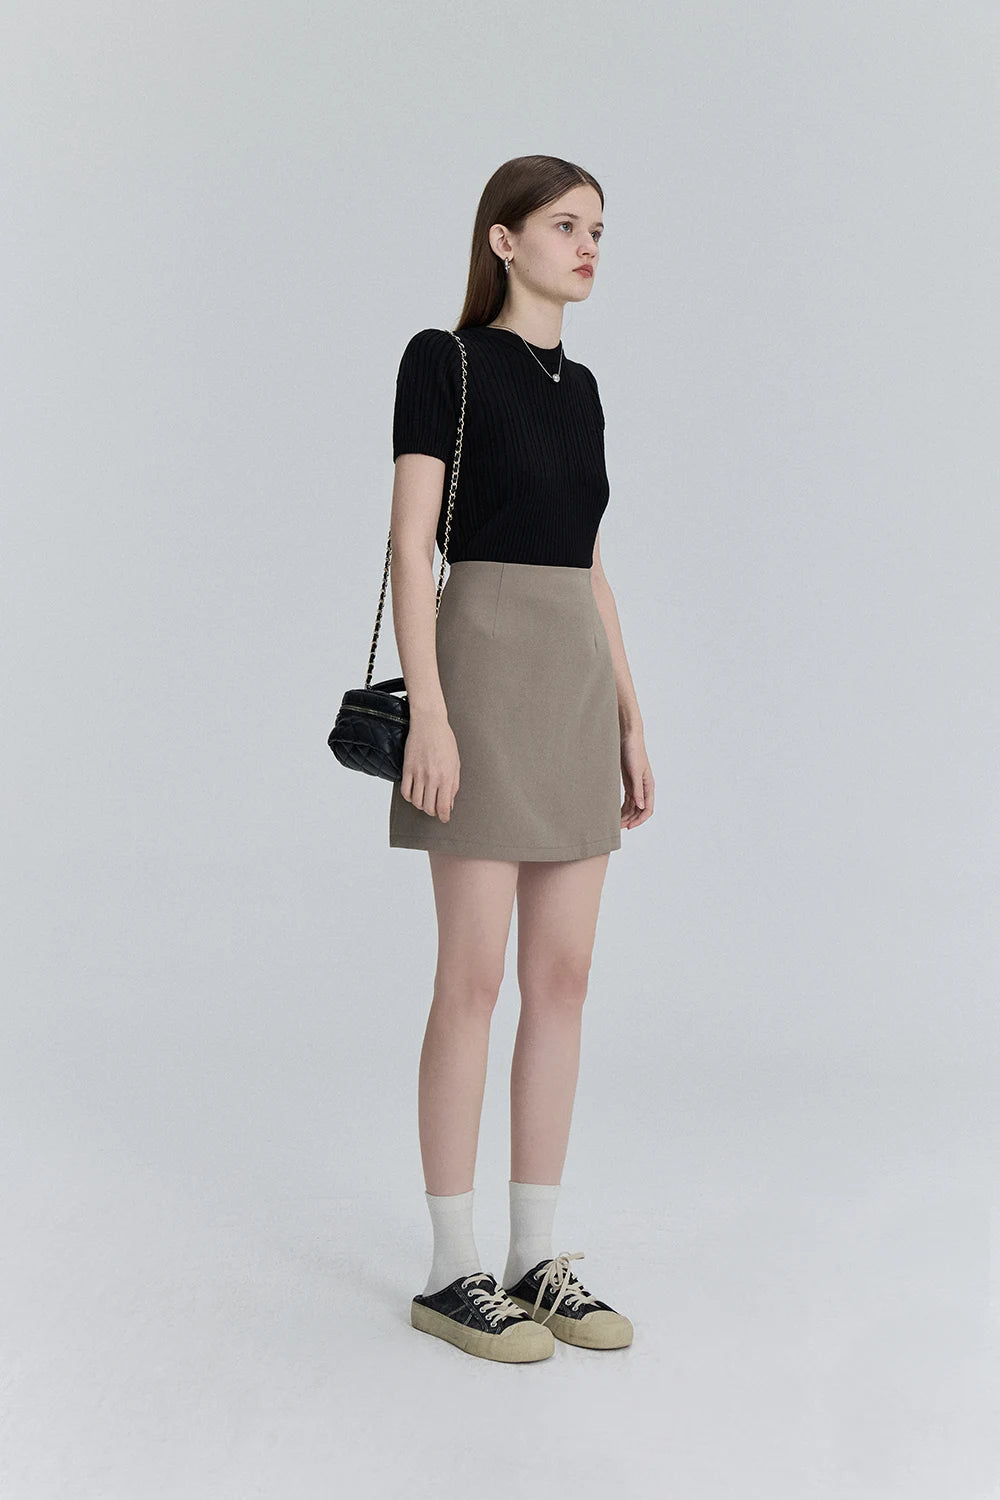 Stylish Short Skirt: Perfect for Versatile Outfits & Everyday Elegance